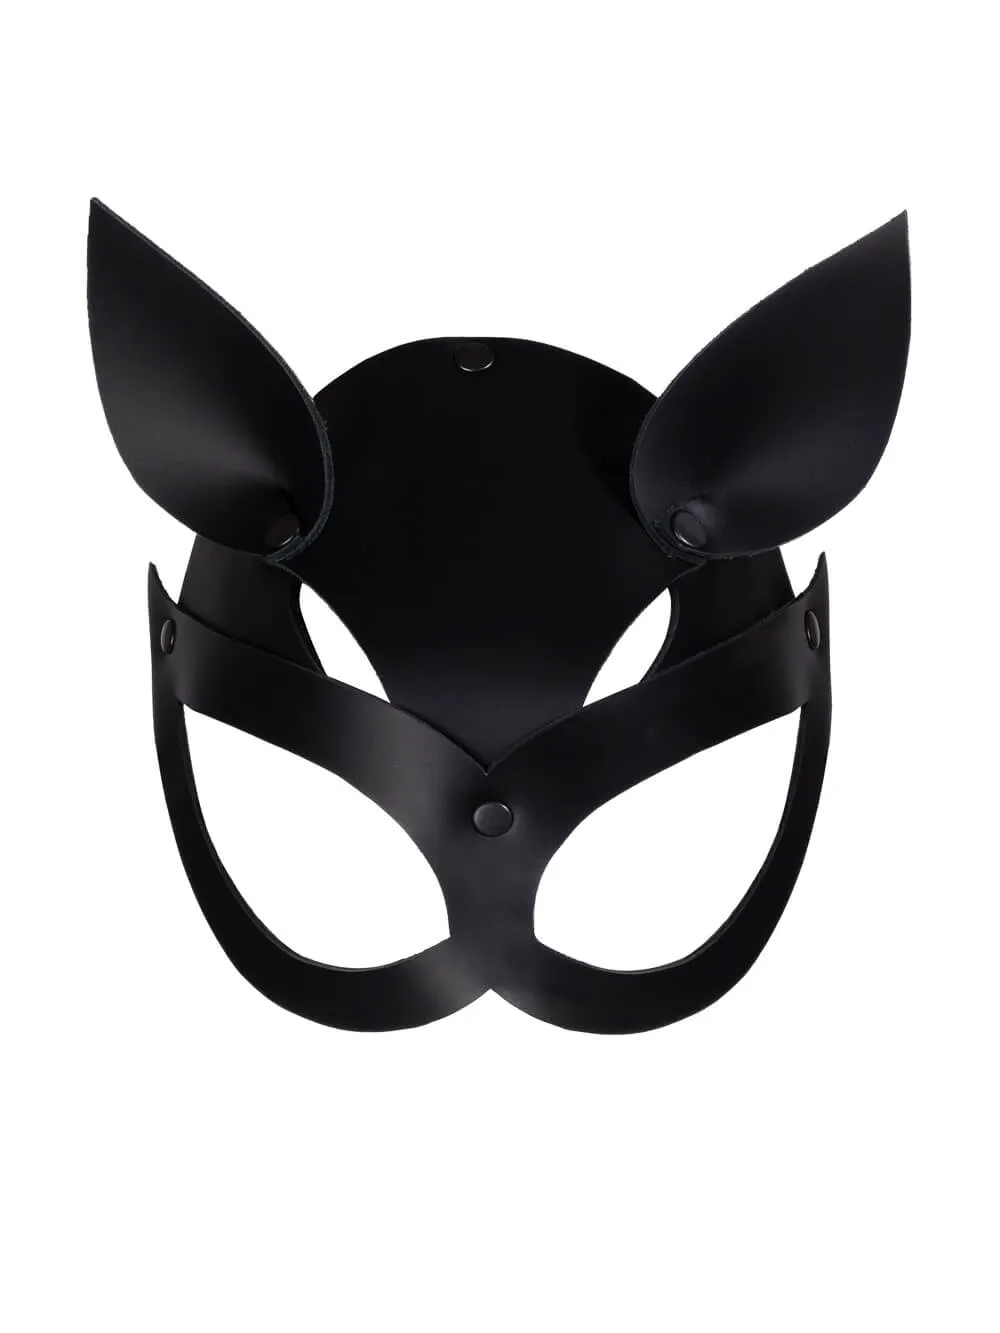 Black erotic leather cat mask with eye holes and cat ears.